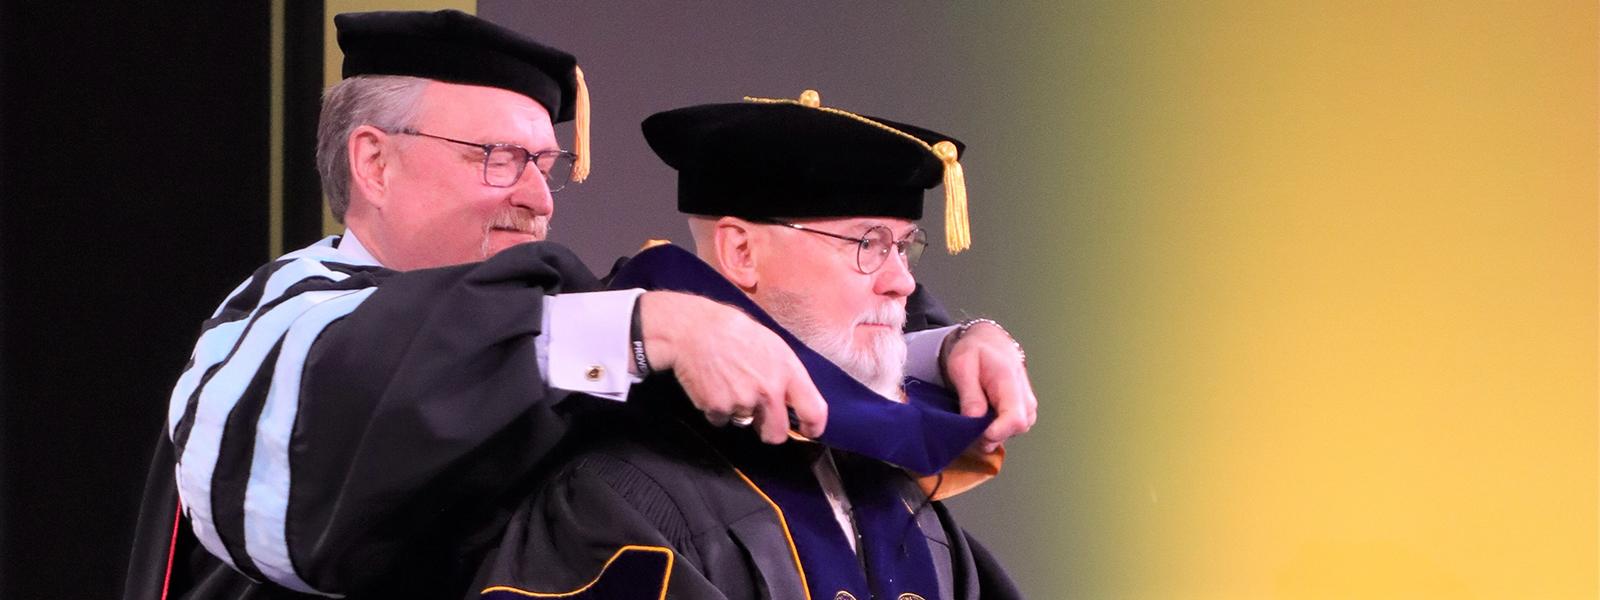 Tom Mullikin receiving his doctorate from CIU Executive Vice President Dr. Rick Christman 